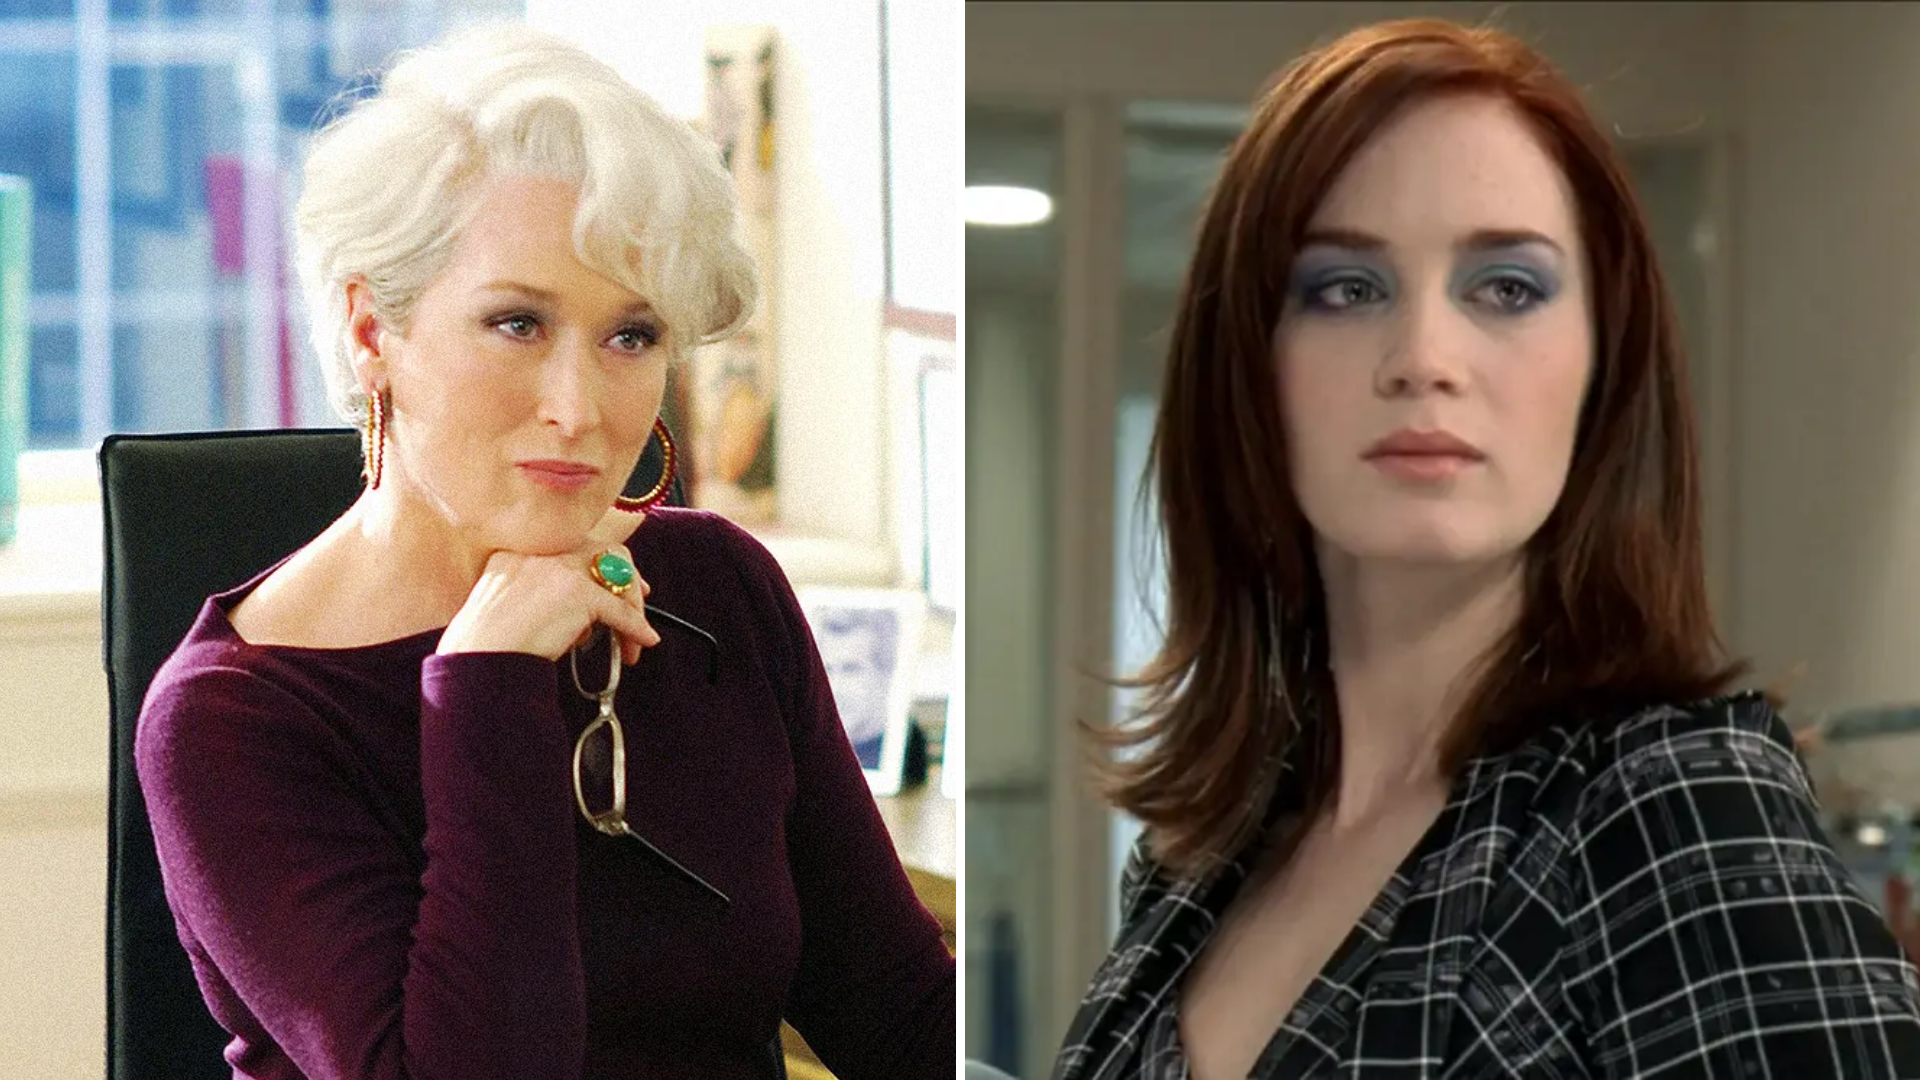 The Devil Wears Prada: Meryl Streep And Emily Blunt To Star In Sequel But Is Anne Hathaway NOT Returning?